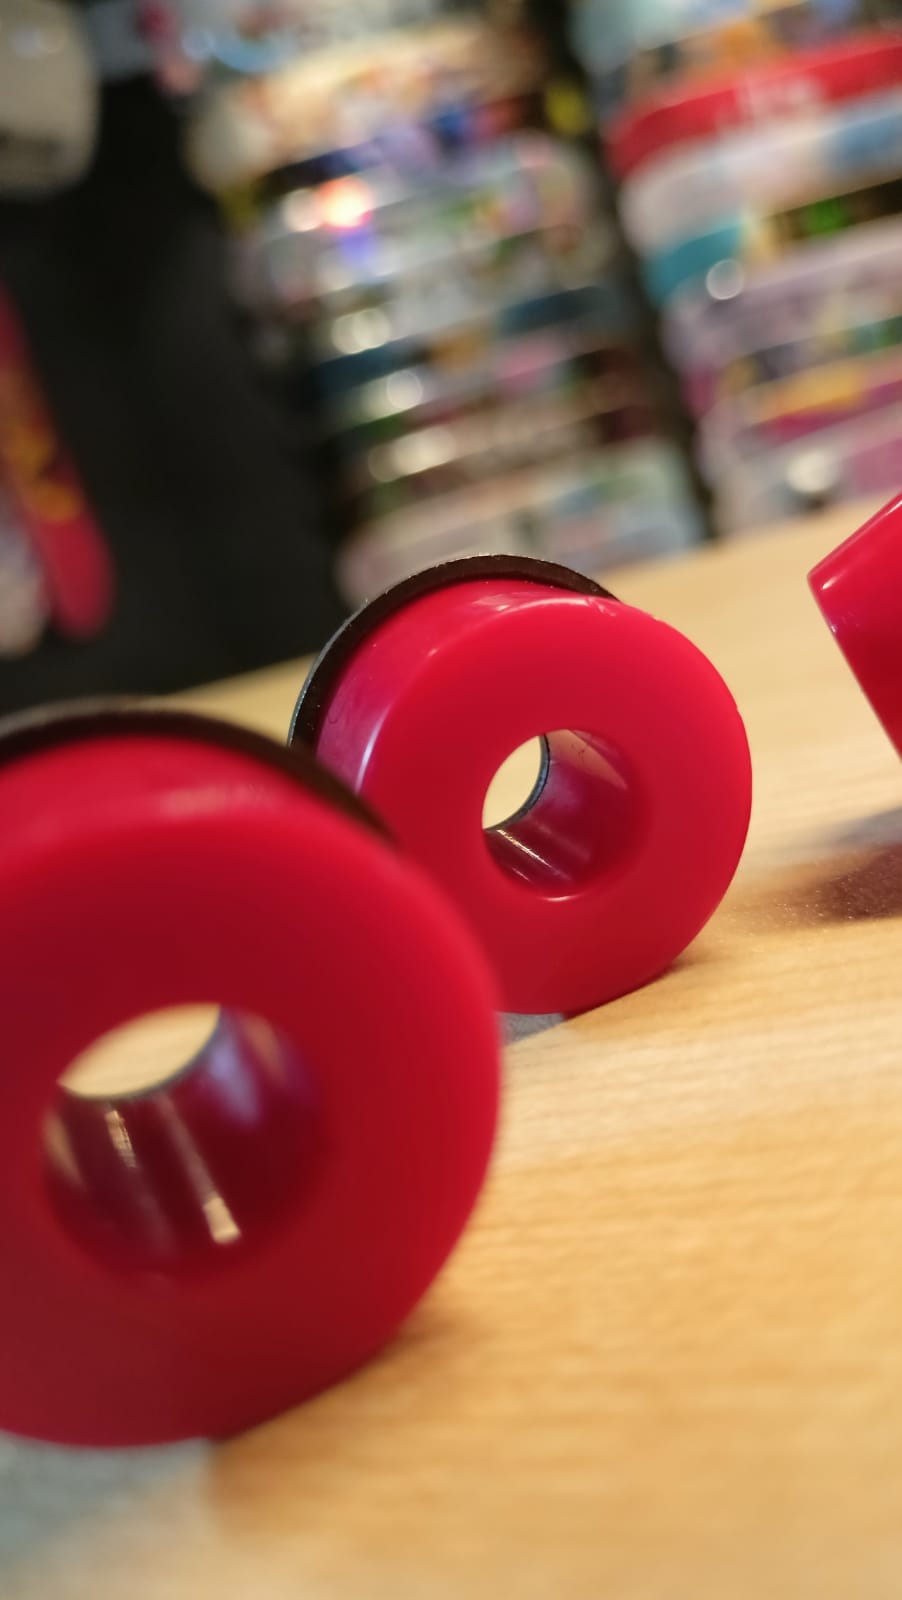 The stiffer bushings are for those who prefer stable rides and rigid trucks.